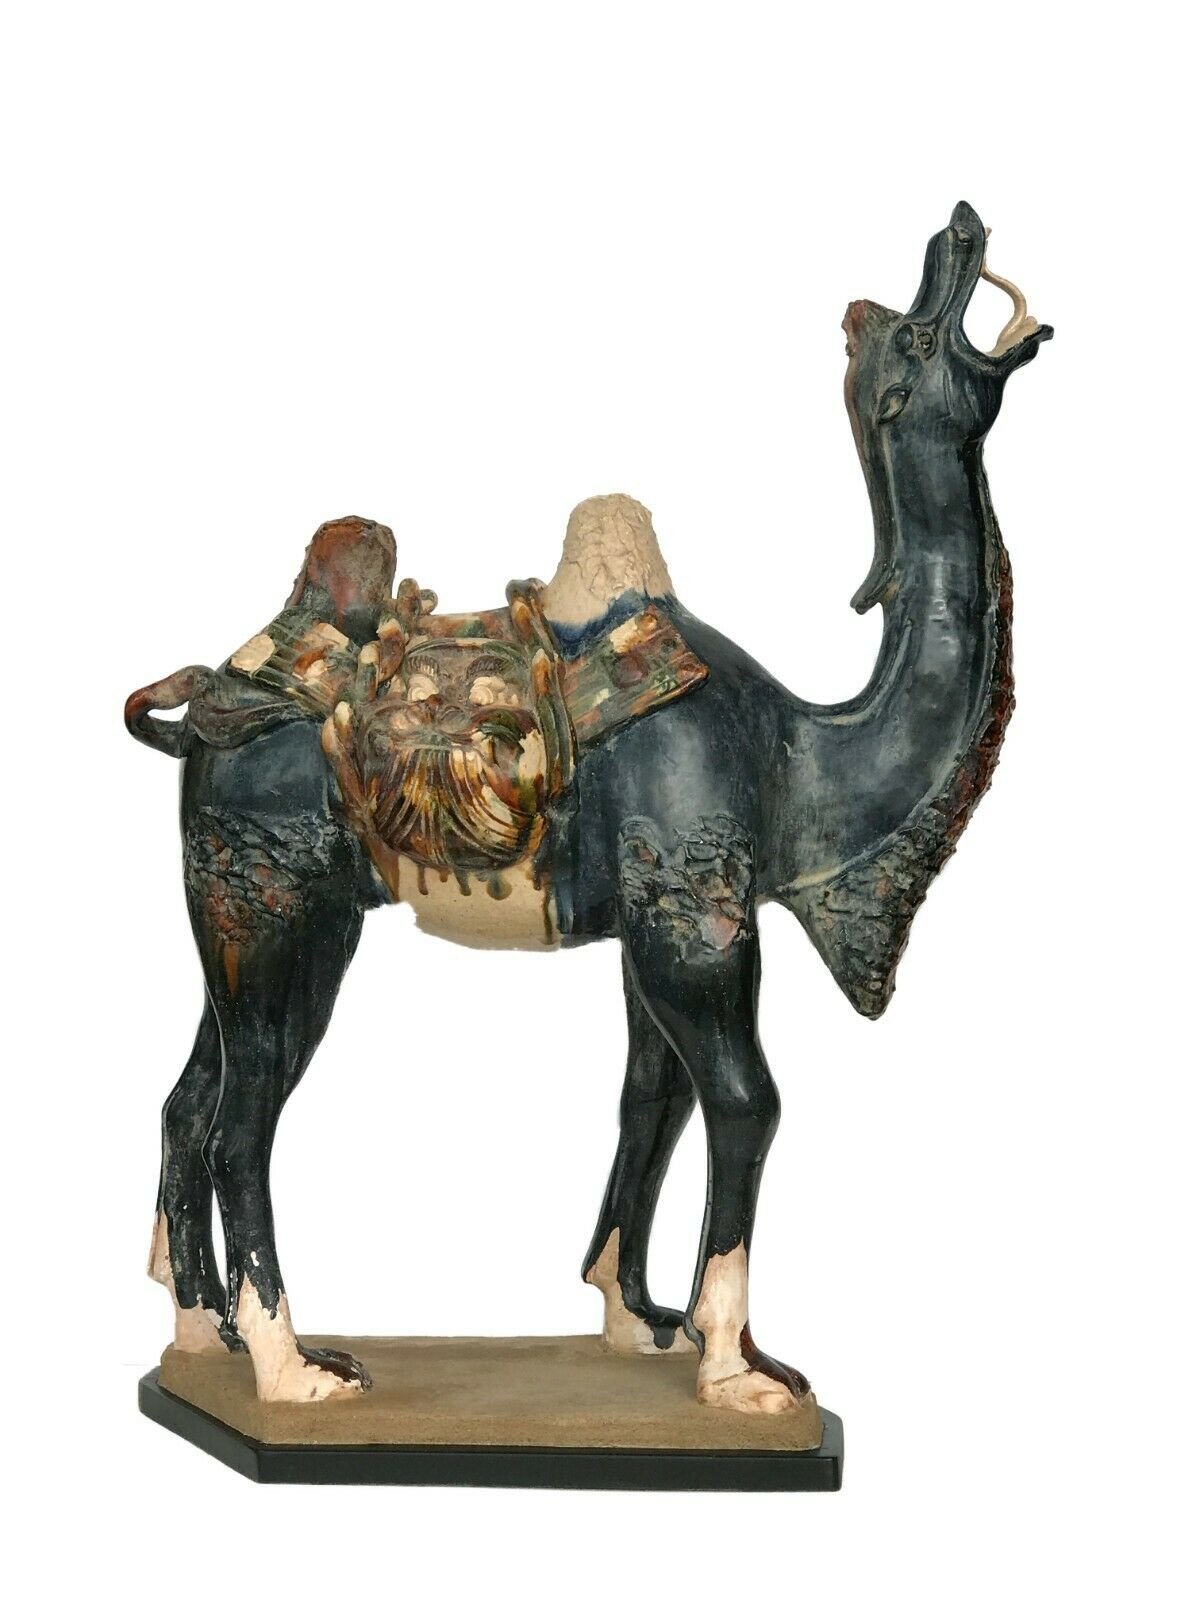 #389 Lg Chinese Tang-StyleTerracotta Camel on Wood Stand 26.5" H